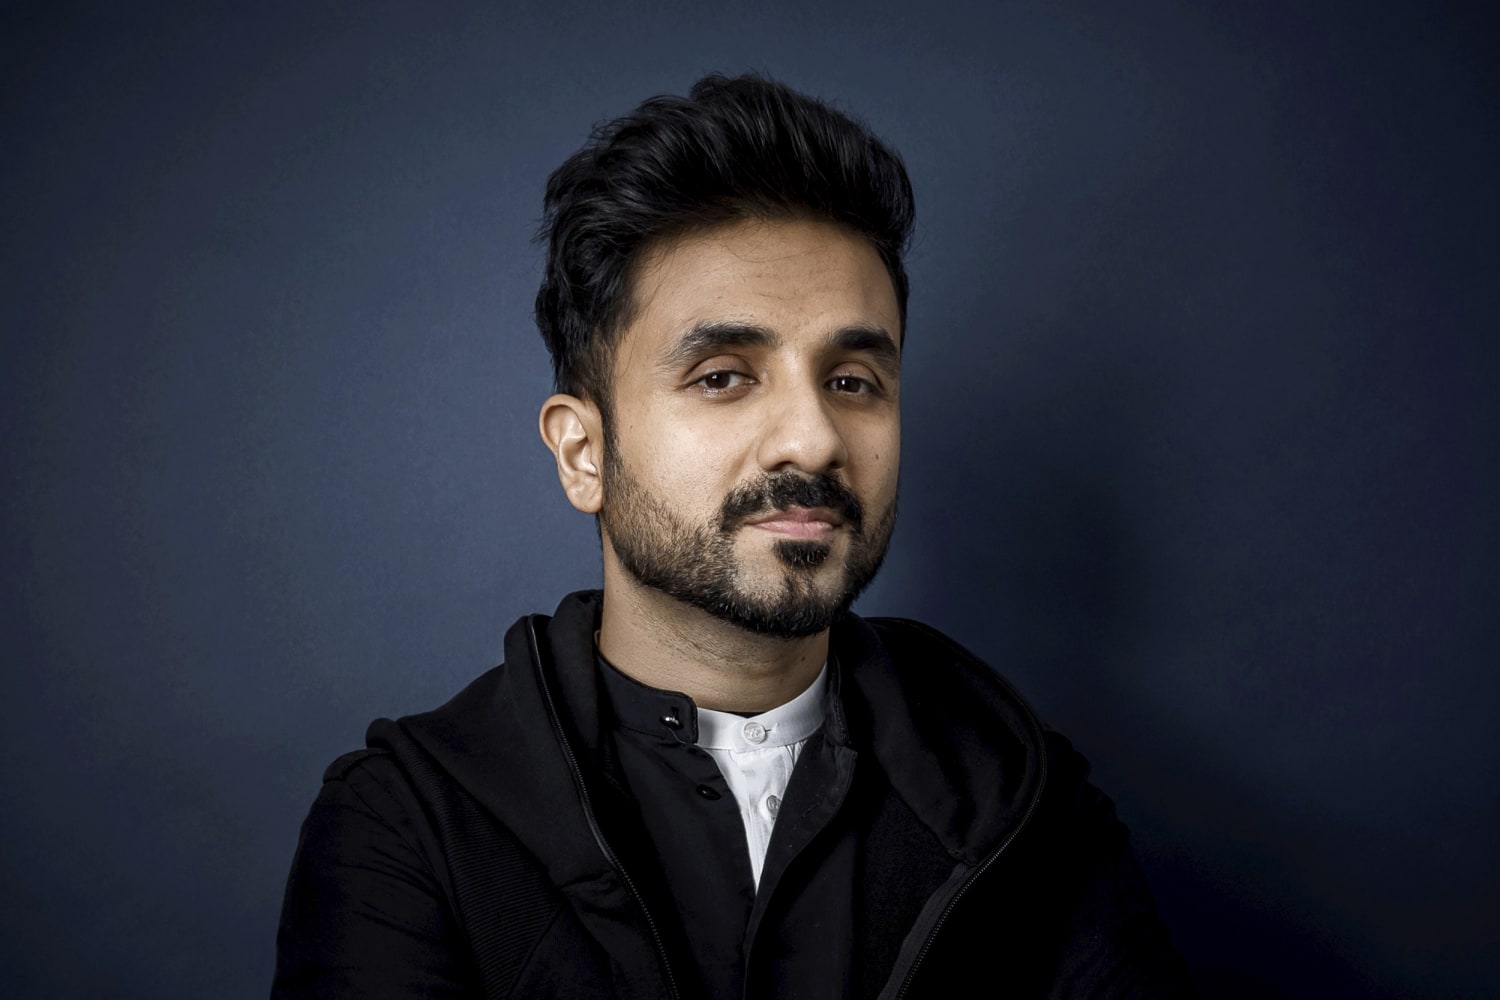 Comedian Vir Das' tale of 'two Indias' at U.S. show sparks outrage at home